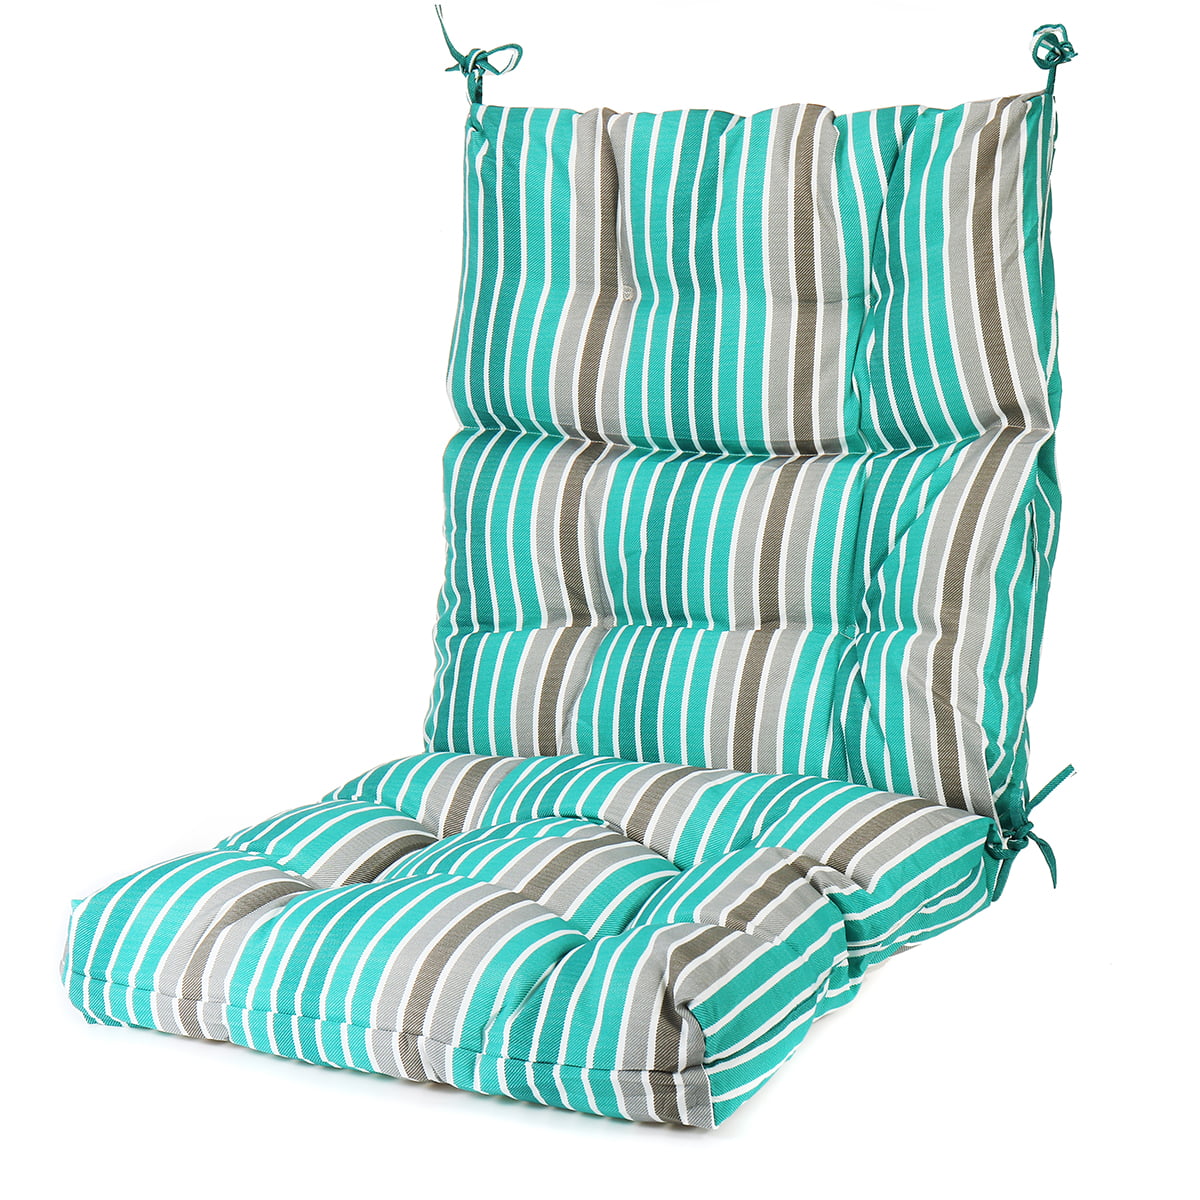 Minimalist Outdoor Chair Cushions Clearance for Large Space